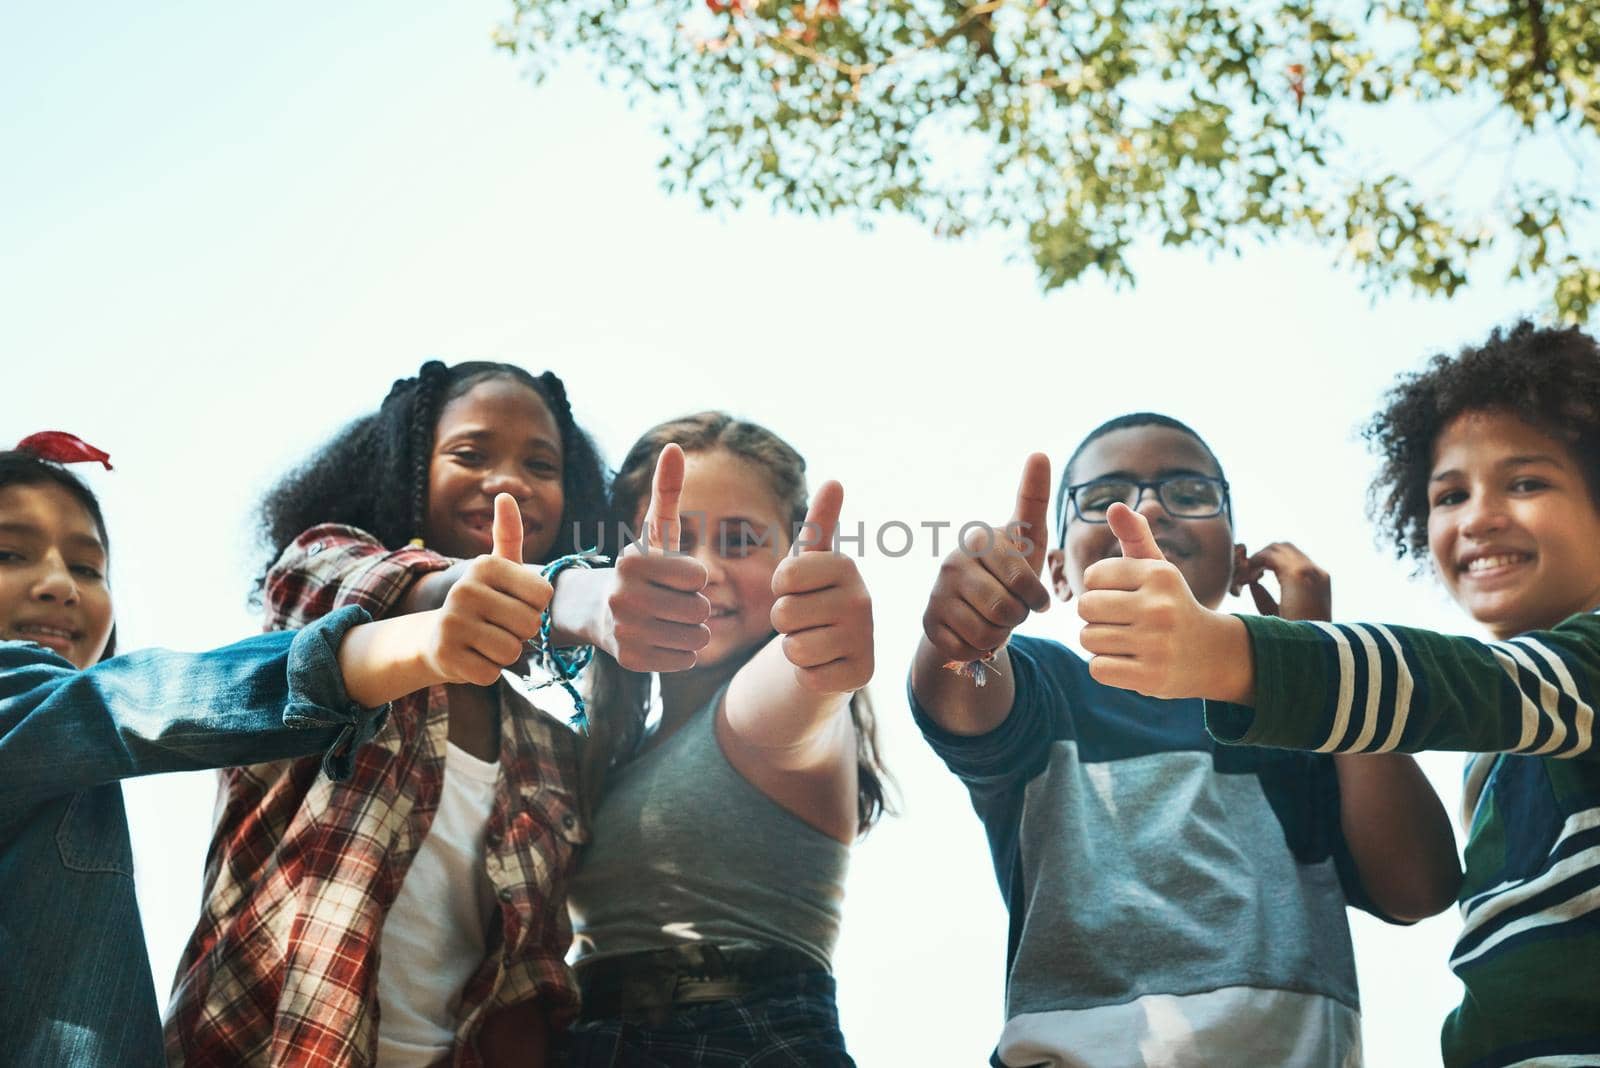 Our favourite summer camp by far. Shot of a group of teenagers showing thumbs up at summer camp. by YuriArcurs